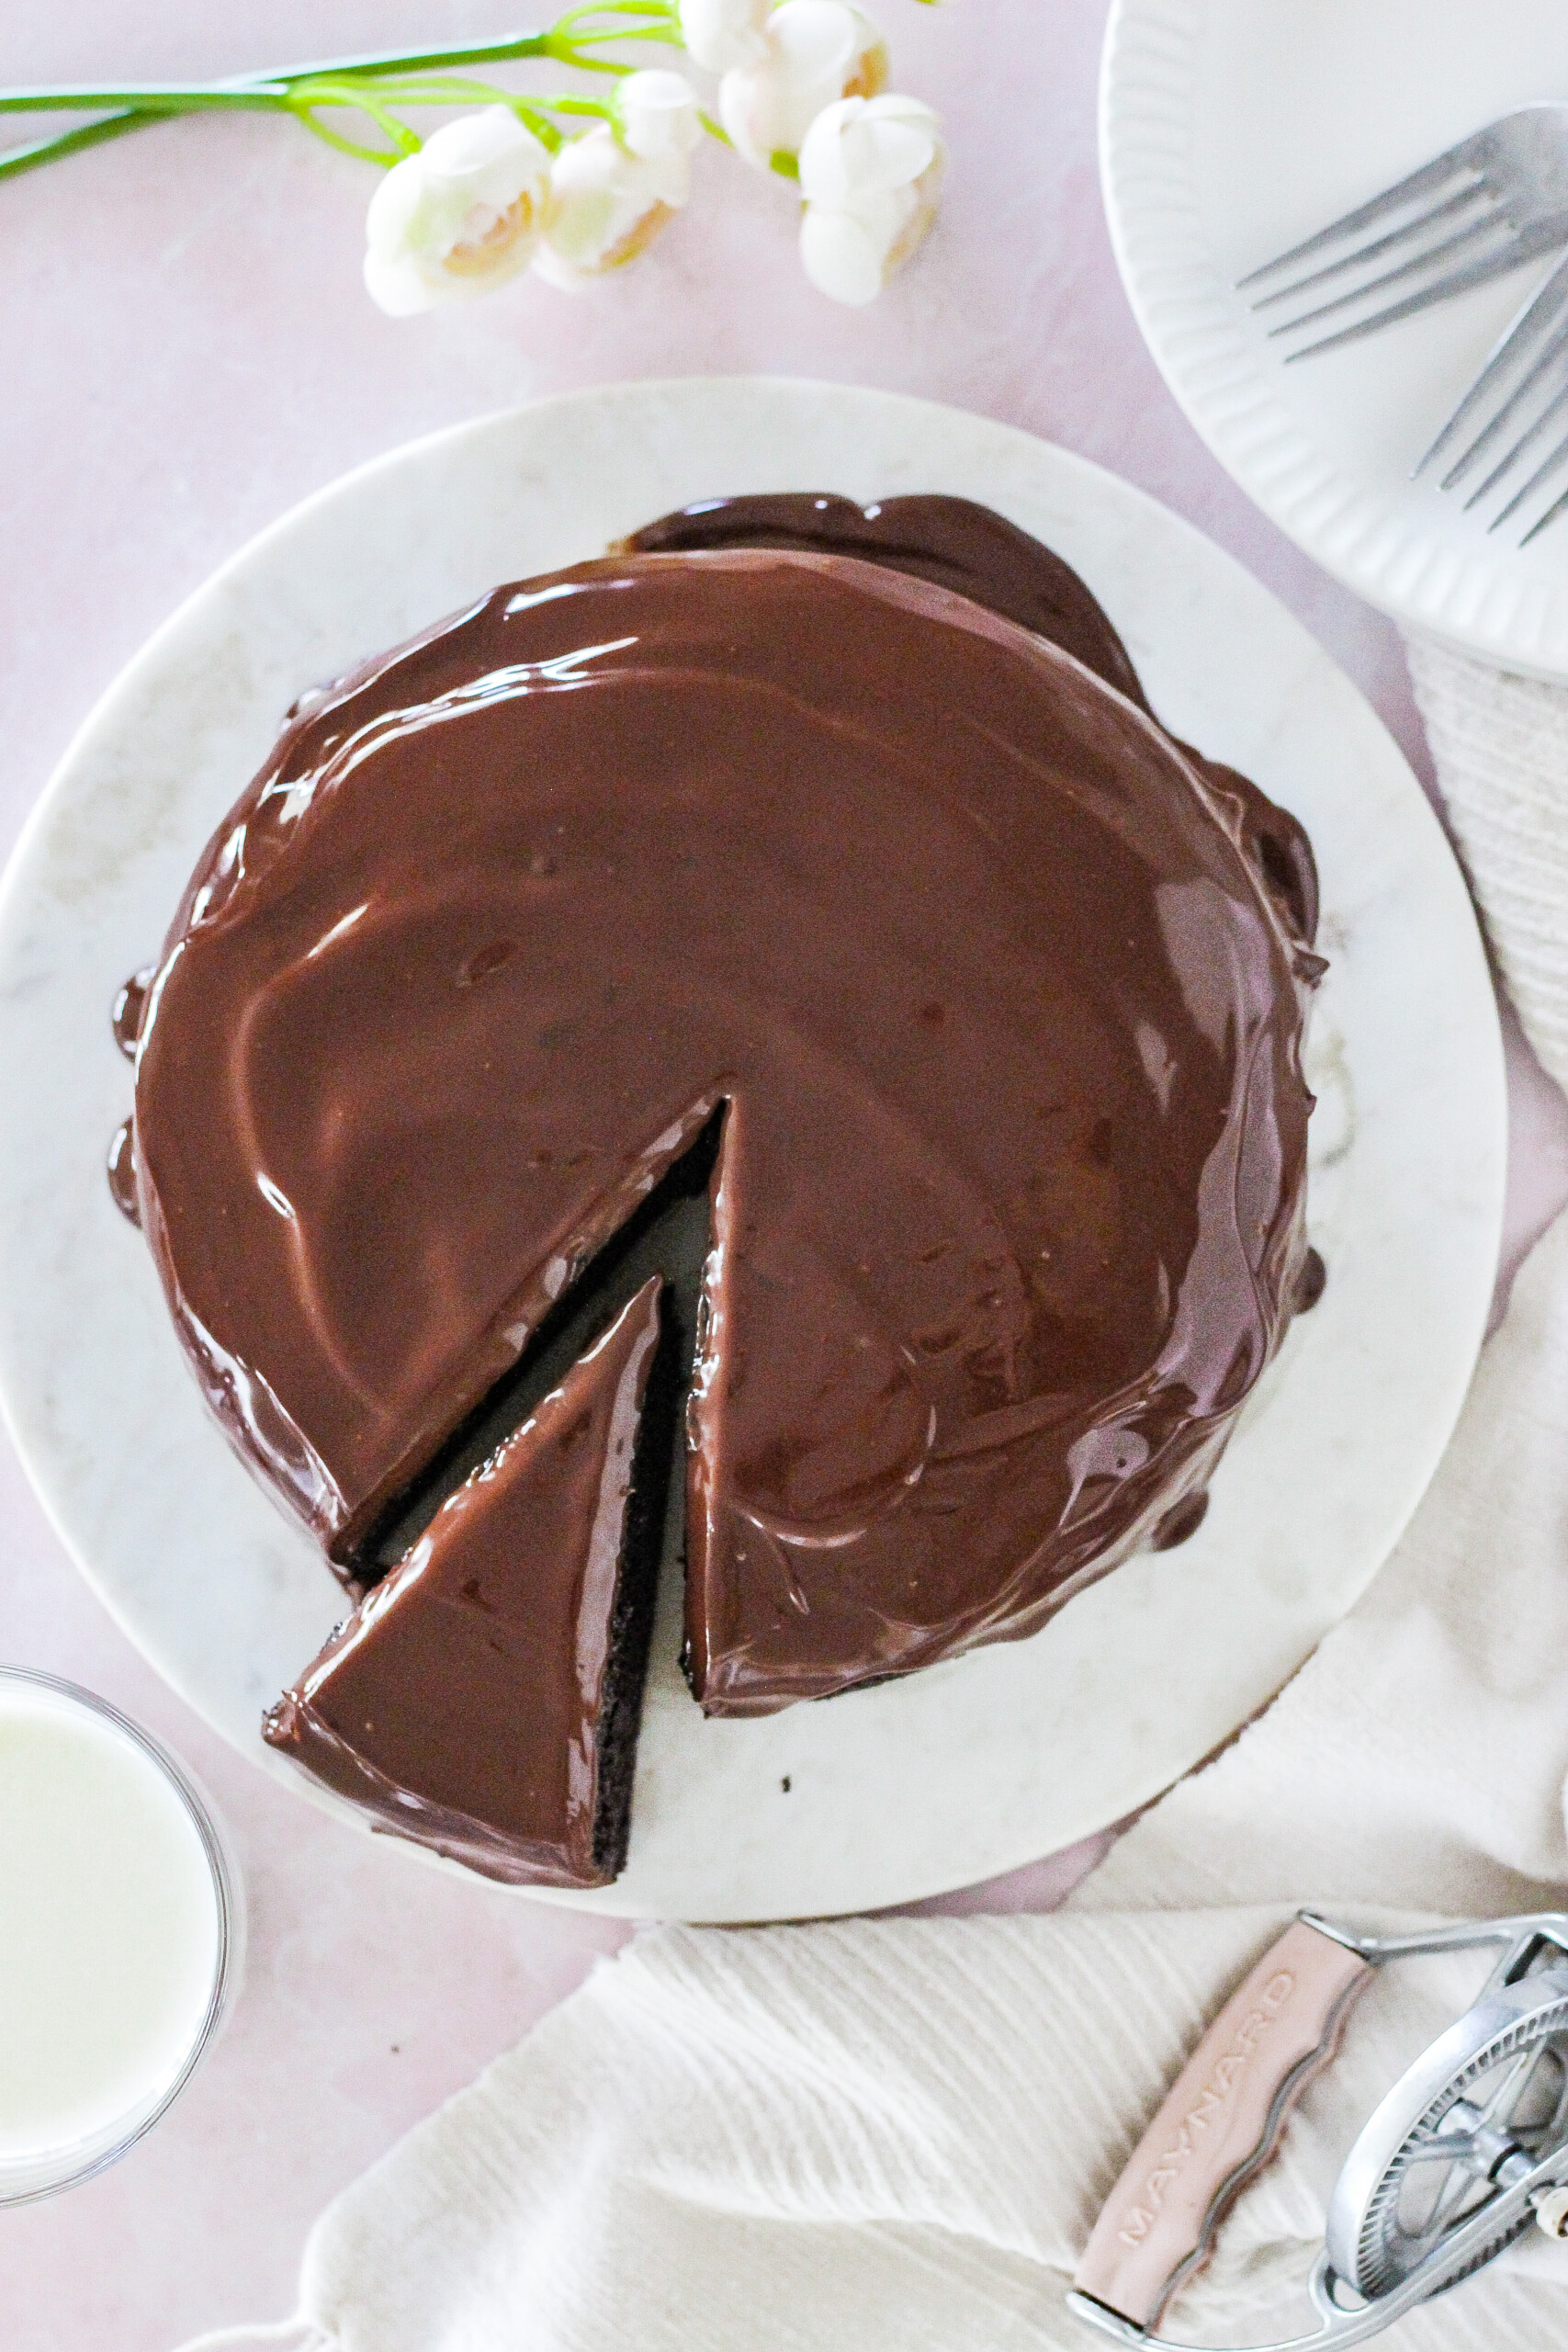 Top view of a chocolate cake with chocolate ganache on it.